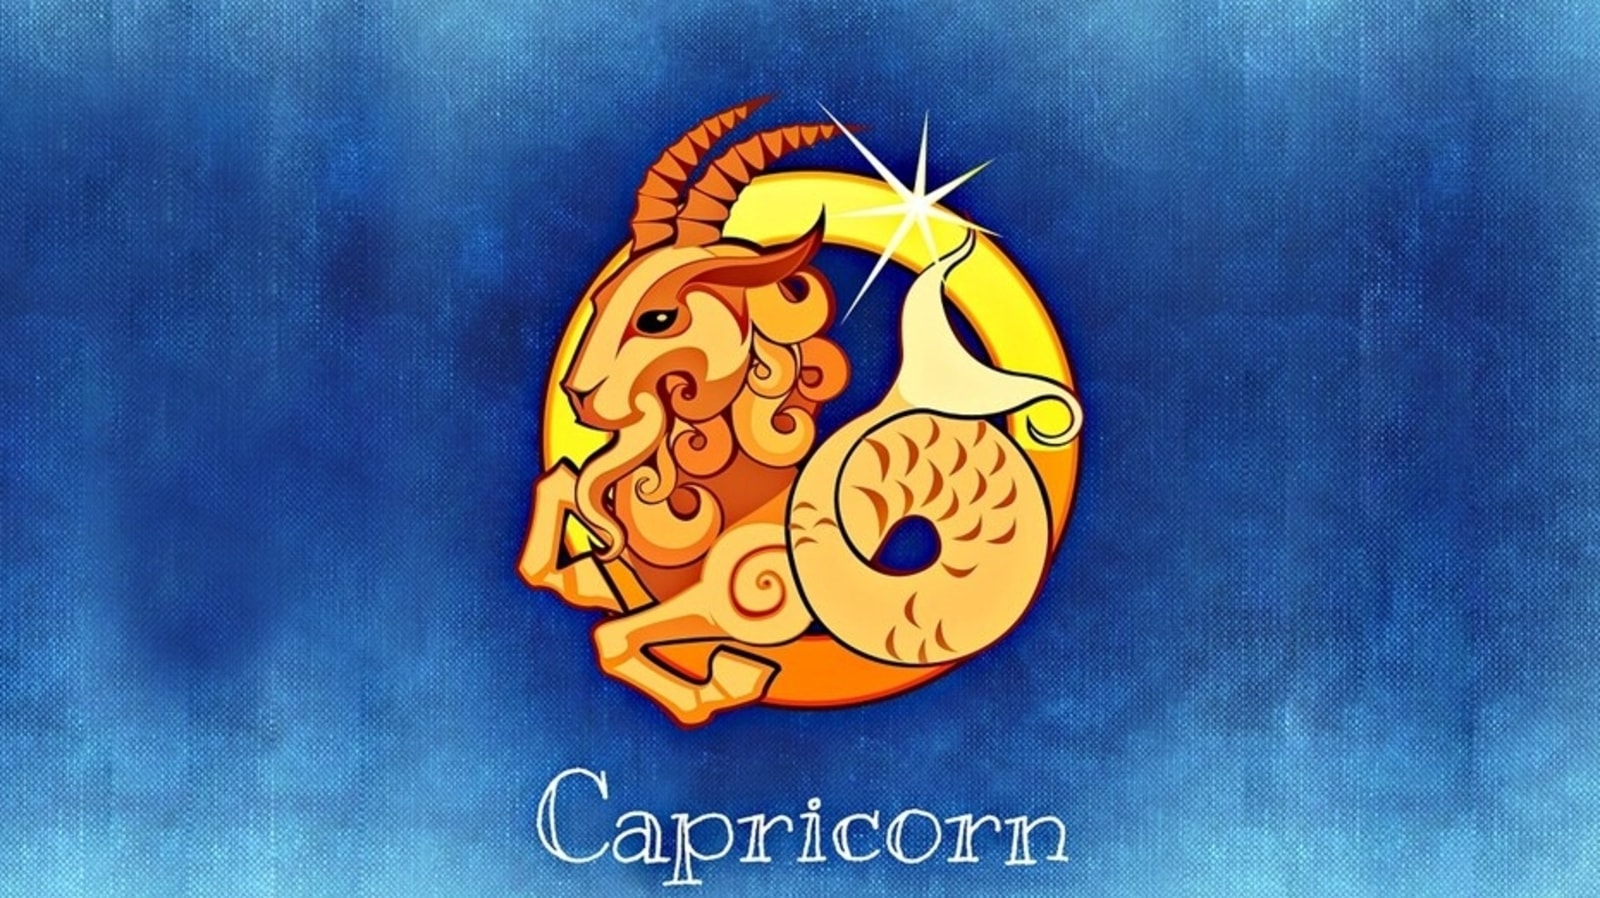 Capricorn Daily Horoscope Astrological Prediction for August 24